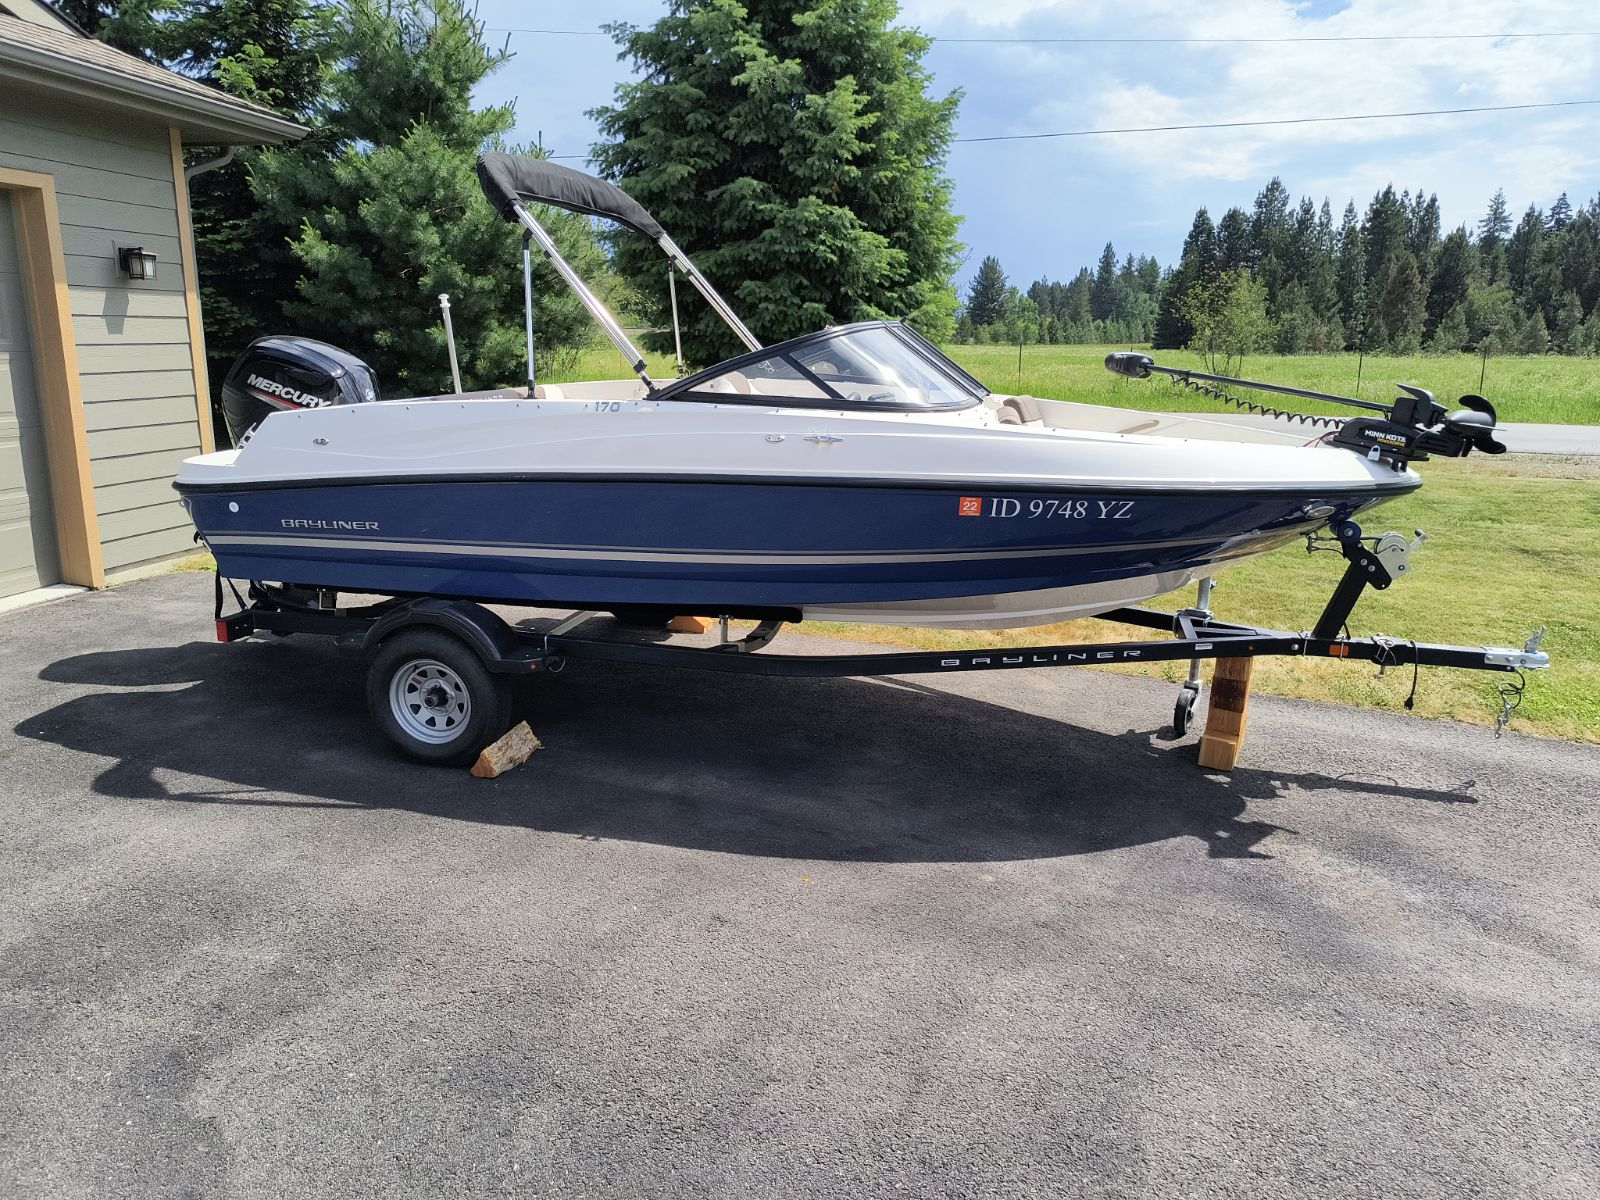 2021 Bayliner 170 17’ Bower  2021 Bayliner 170 17’ Bower Rider with trailer. GPS fish finder and Bimini. 115 hp Mercury Outboard for skiing. Minnkota trolling motor for fishing. Very low hours + lots of extras. $26,500 360-296-6865 Sandpoint